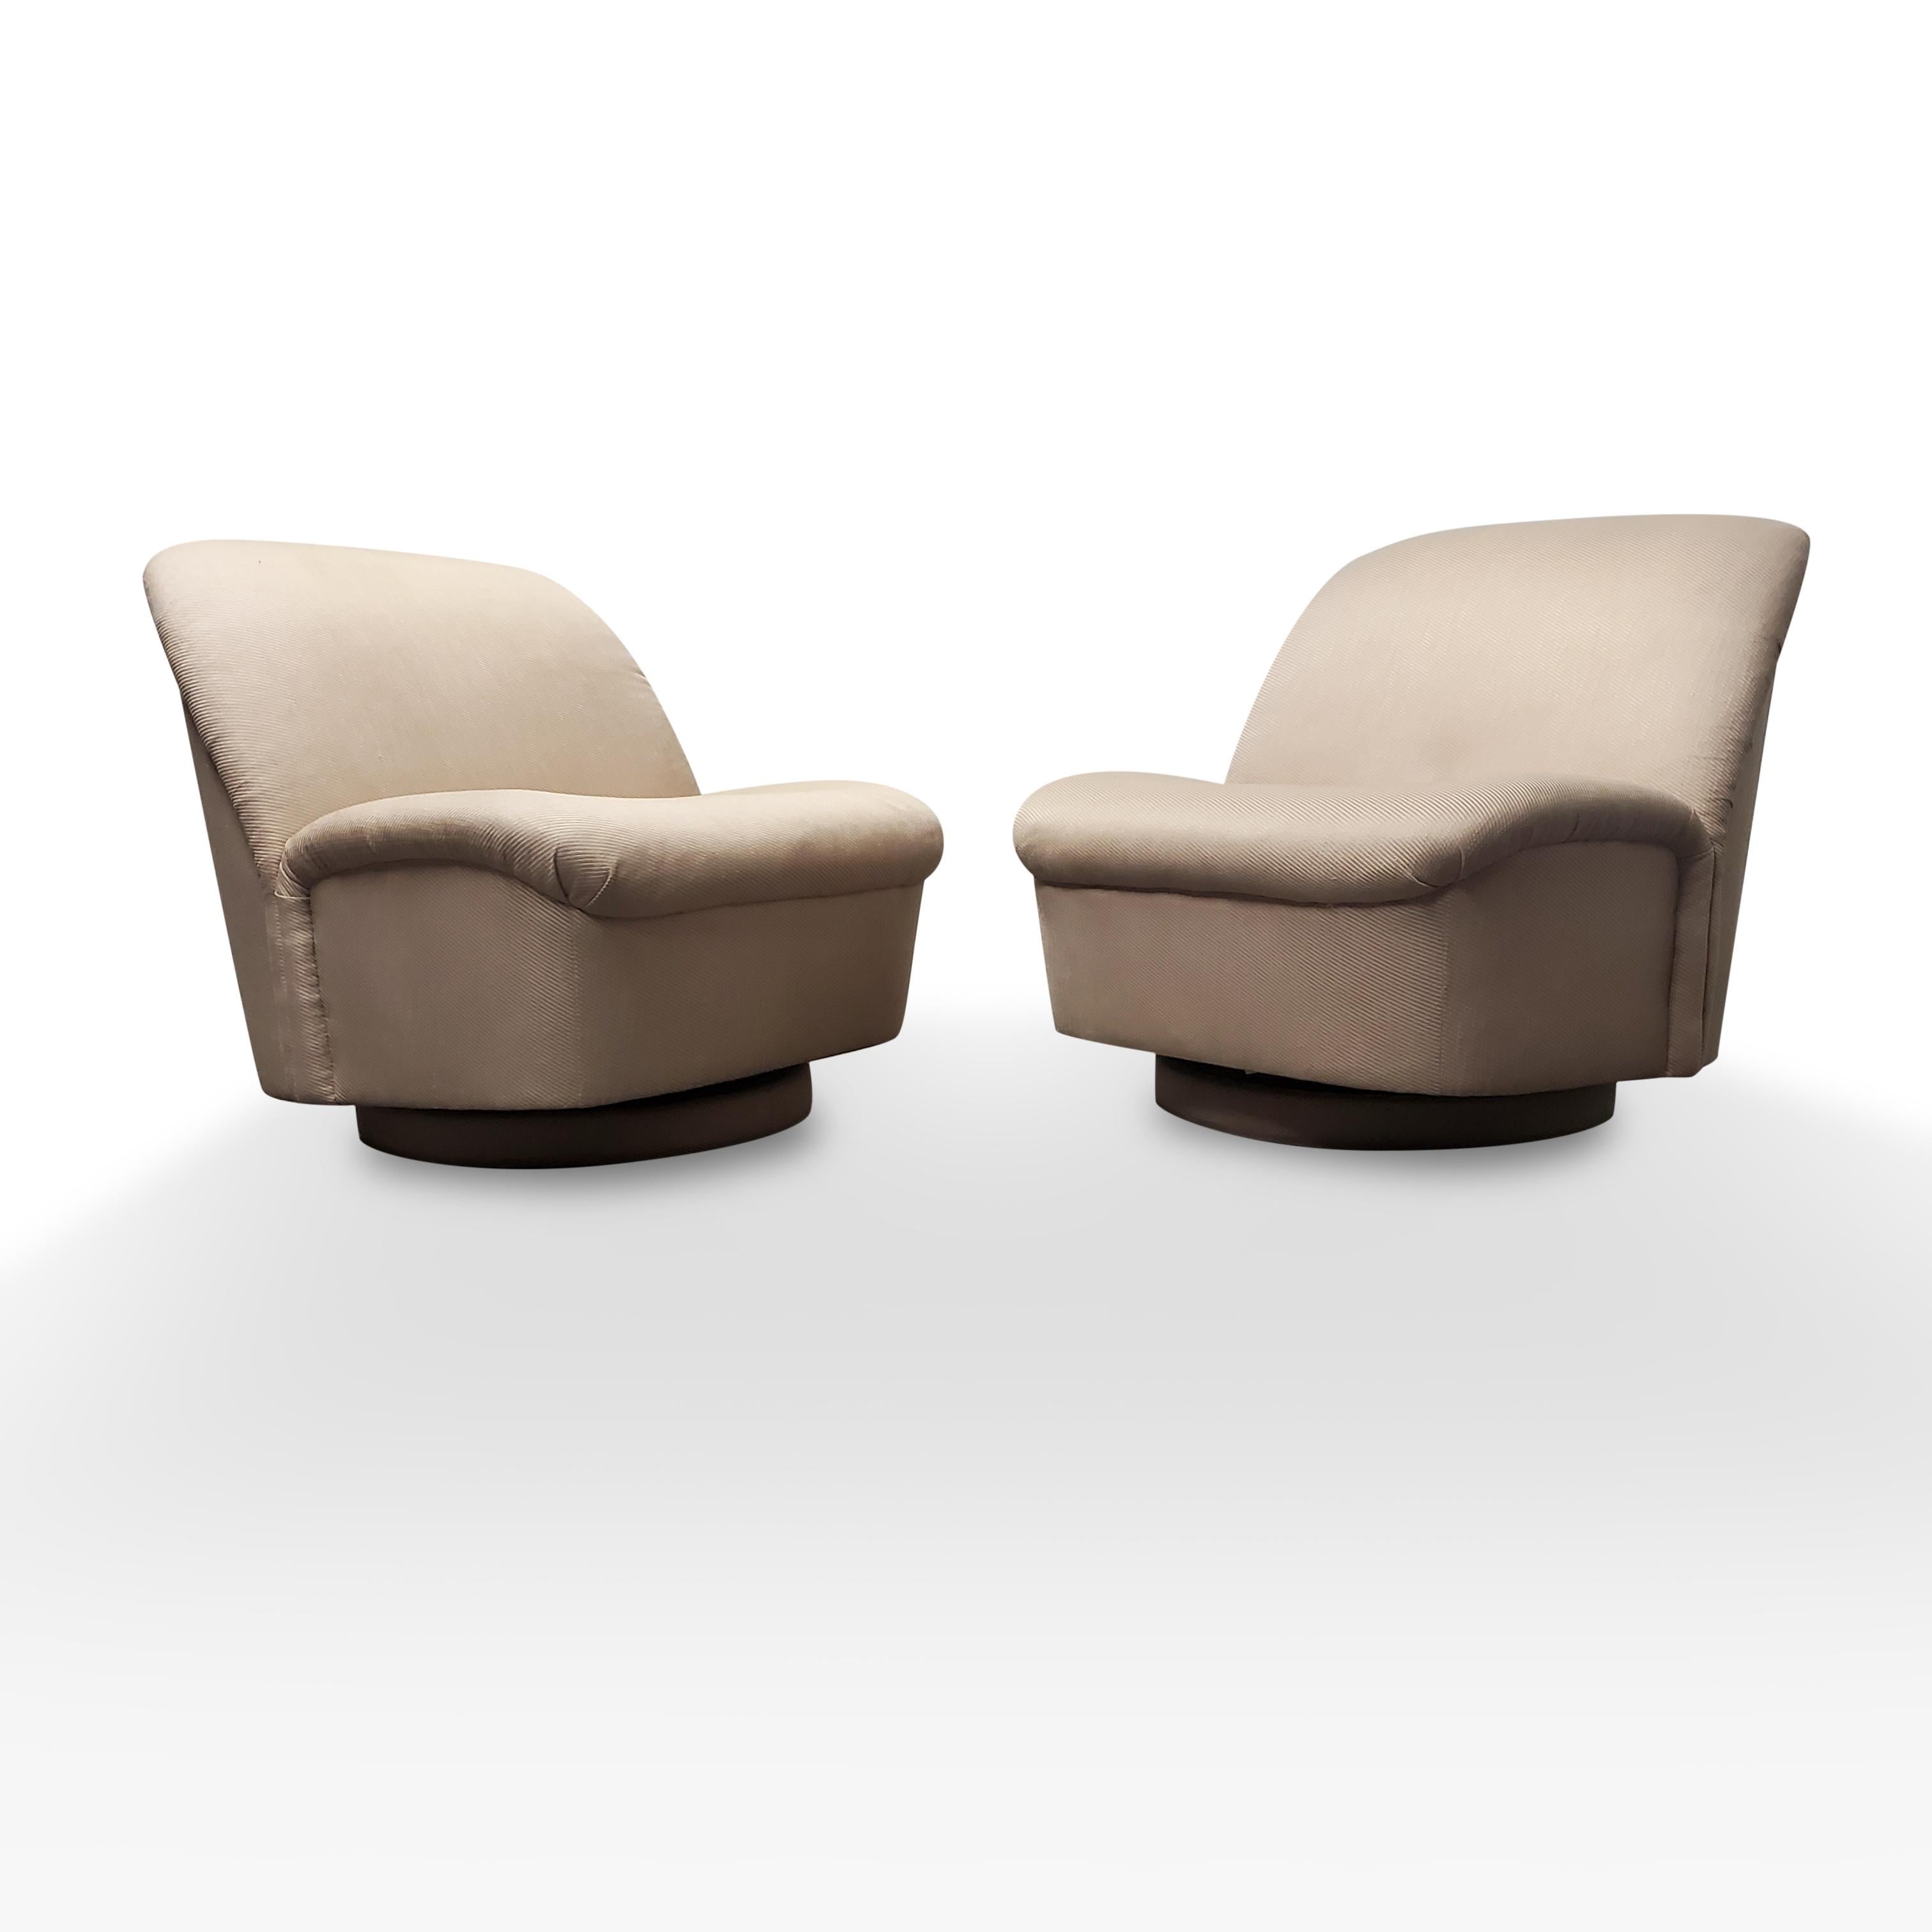 Upholstery Pair of Signed Directional Swivel / Tilt Lounge Chairs